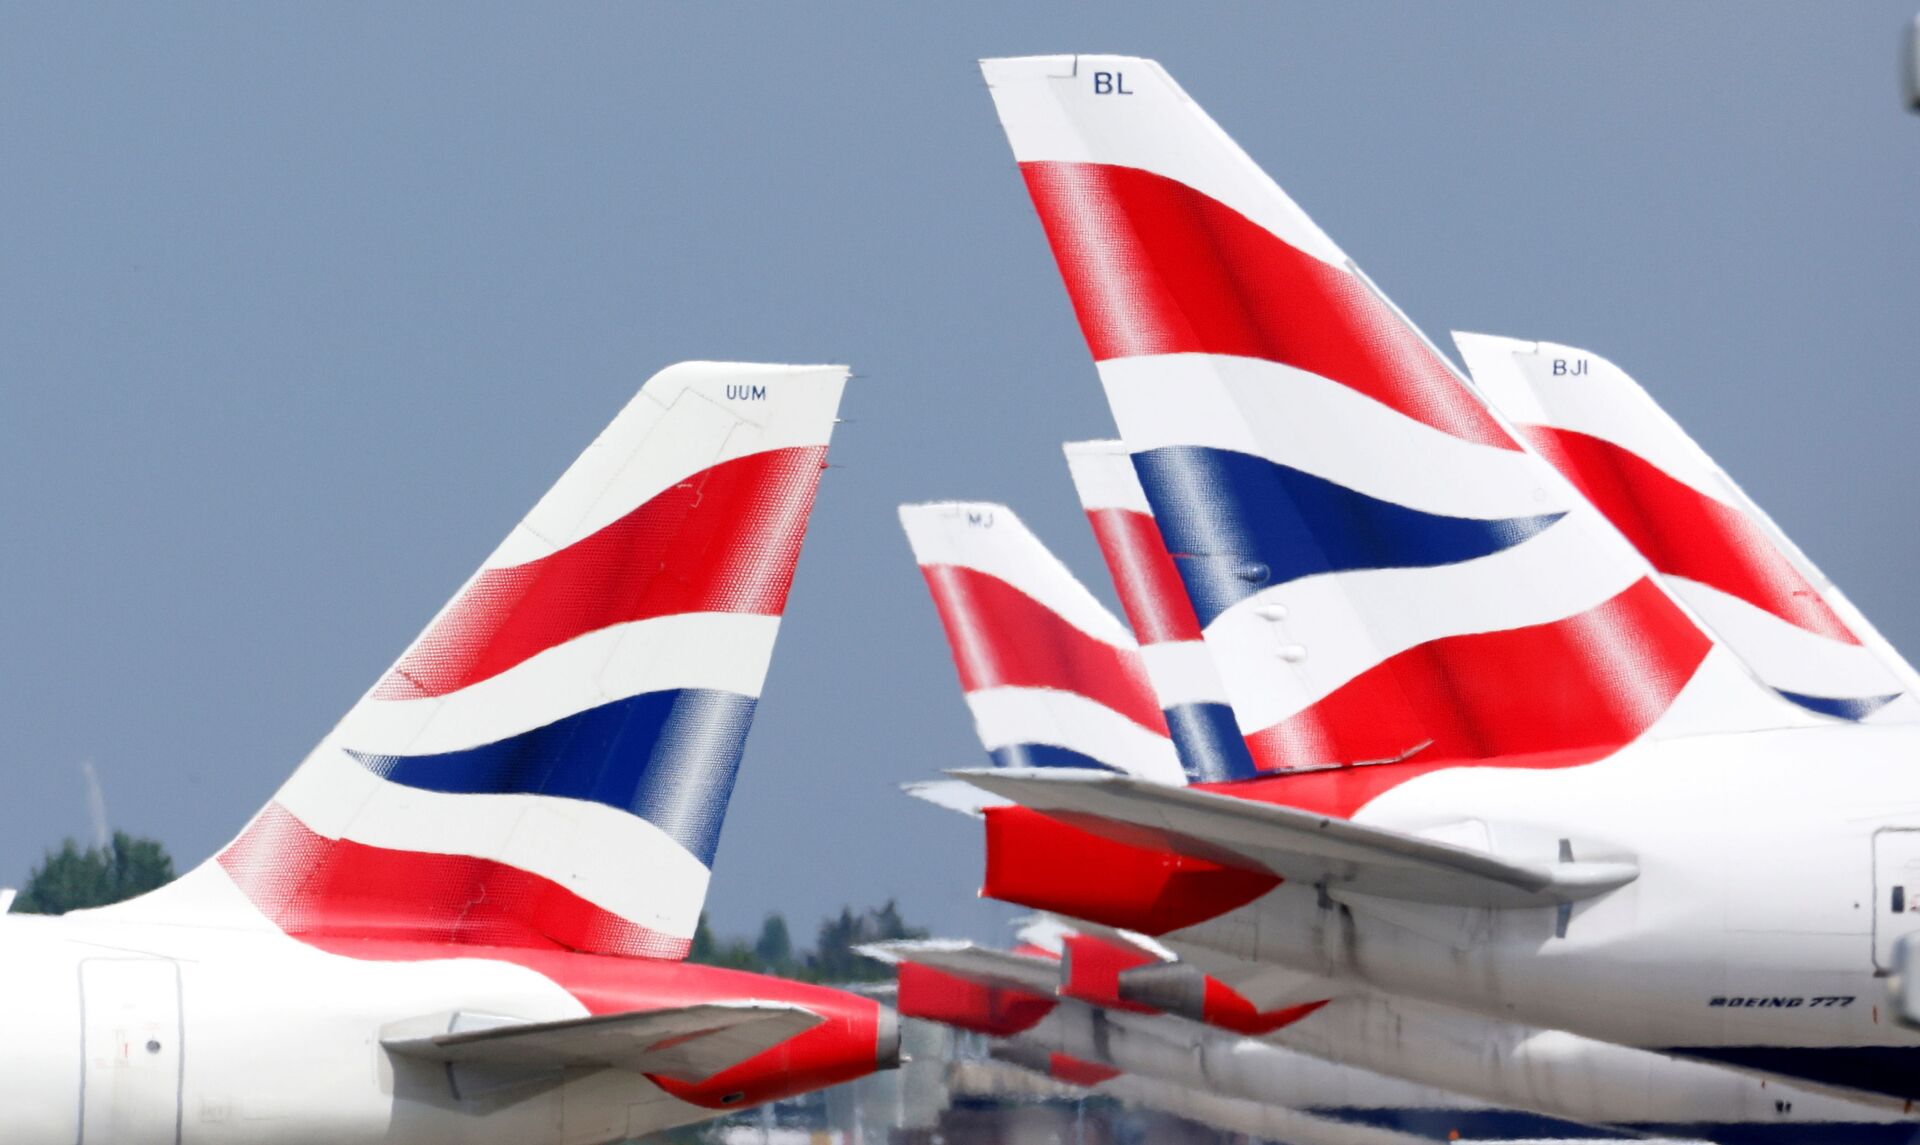  British Airways tail fins are pictured at Heathrow Airport in London, Britain, May 17, 202 - Sputnik International, 1920, 10.09.2021